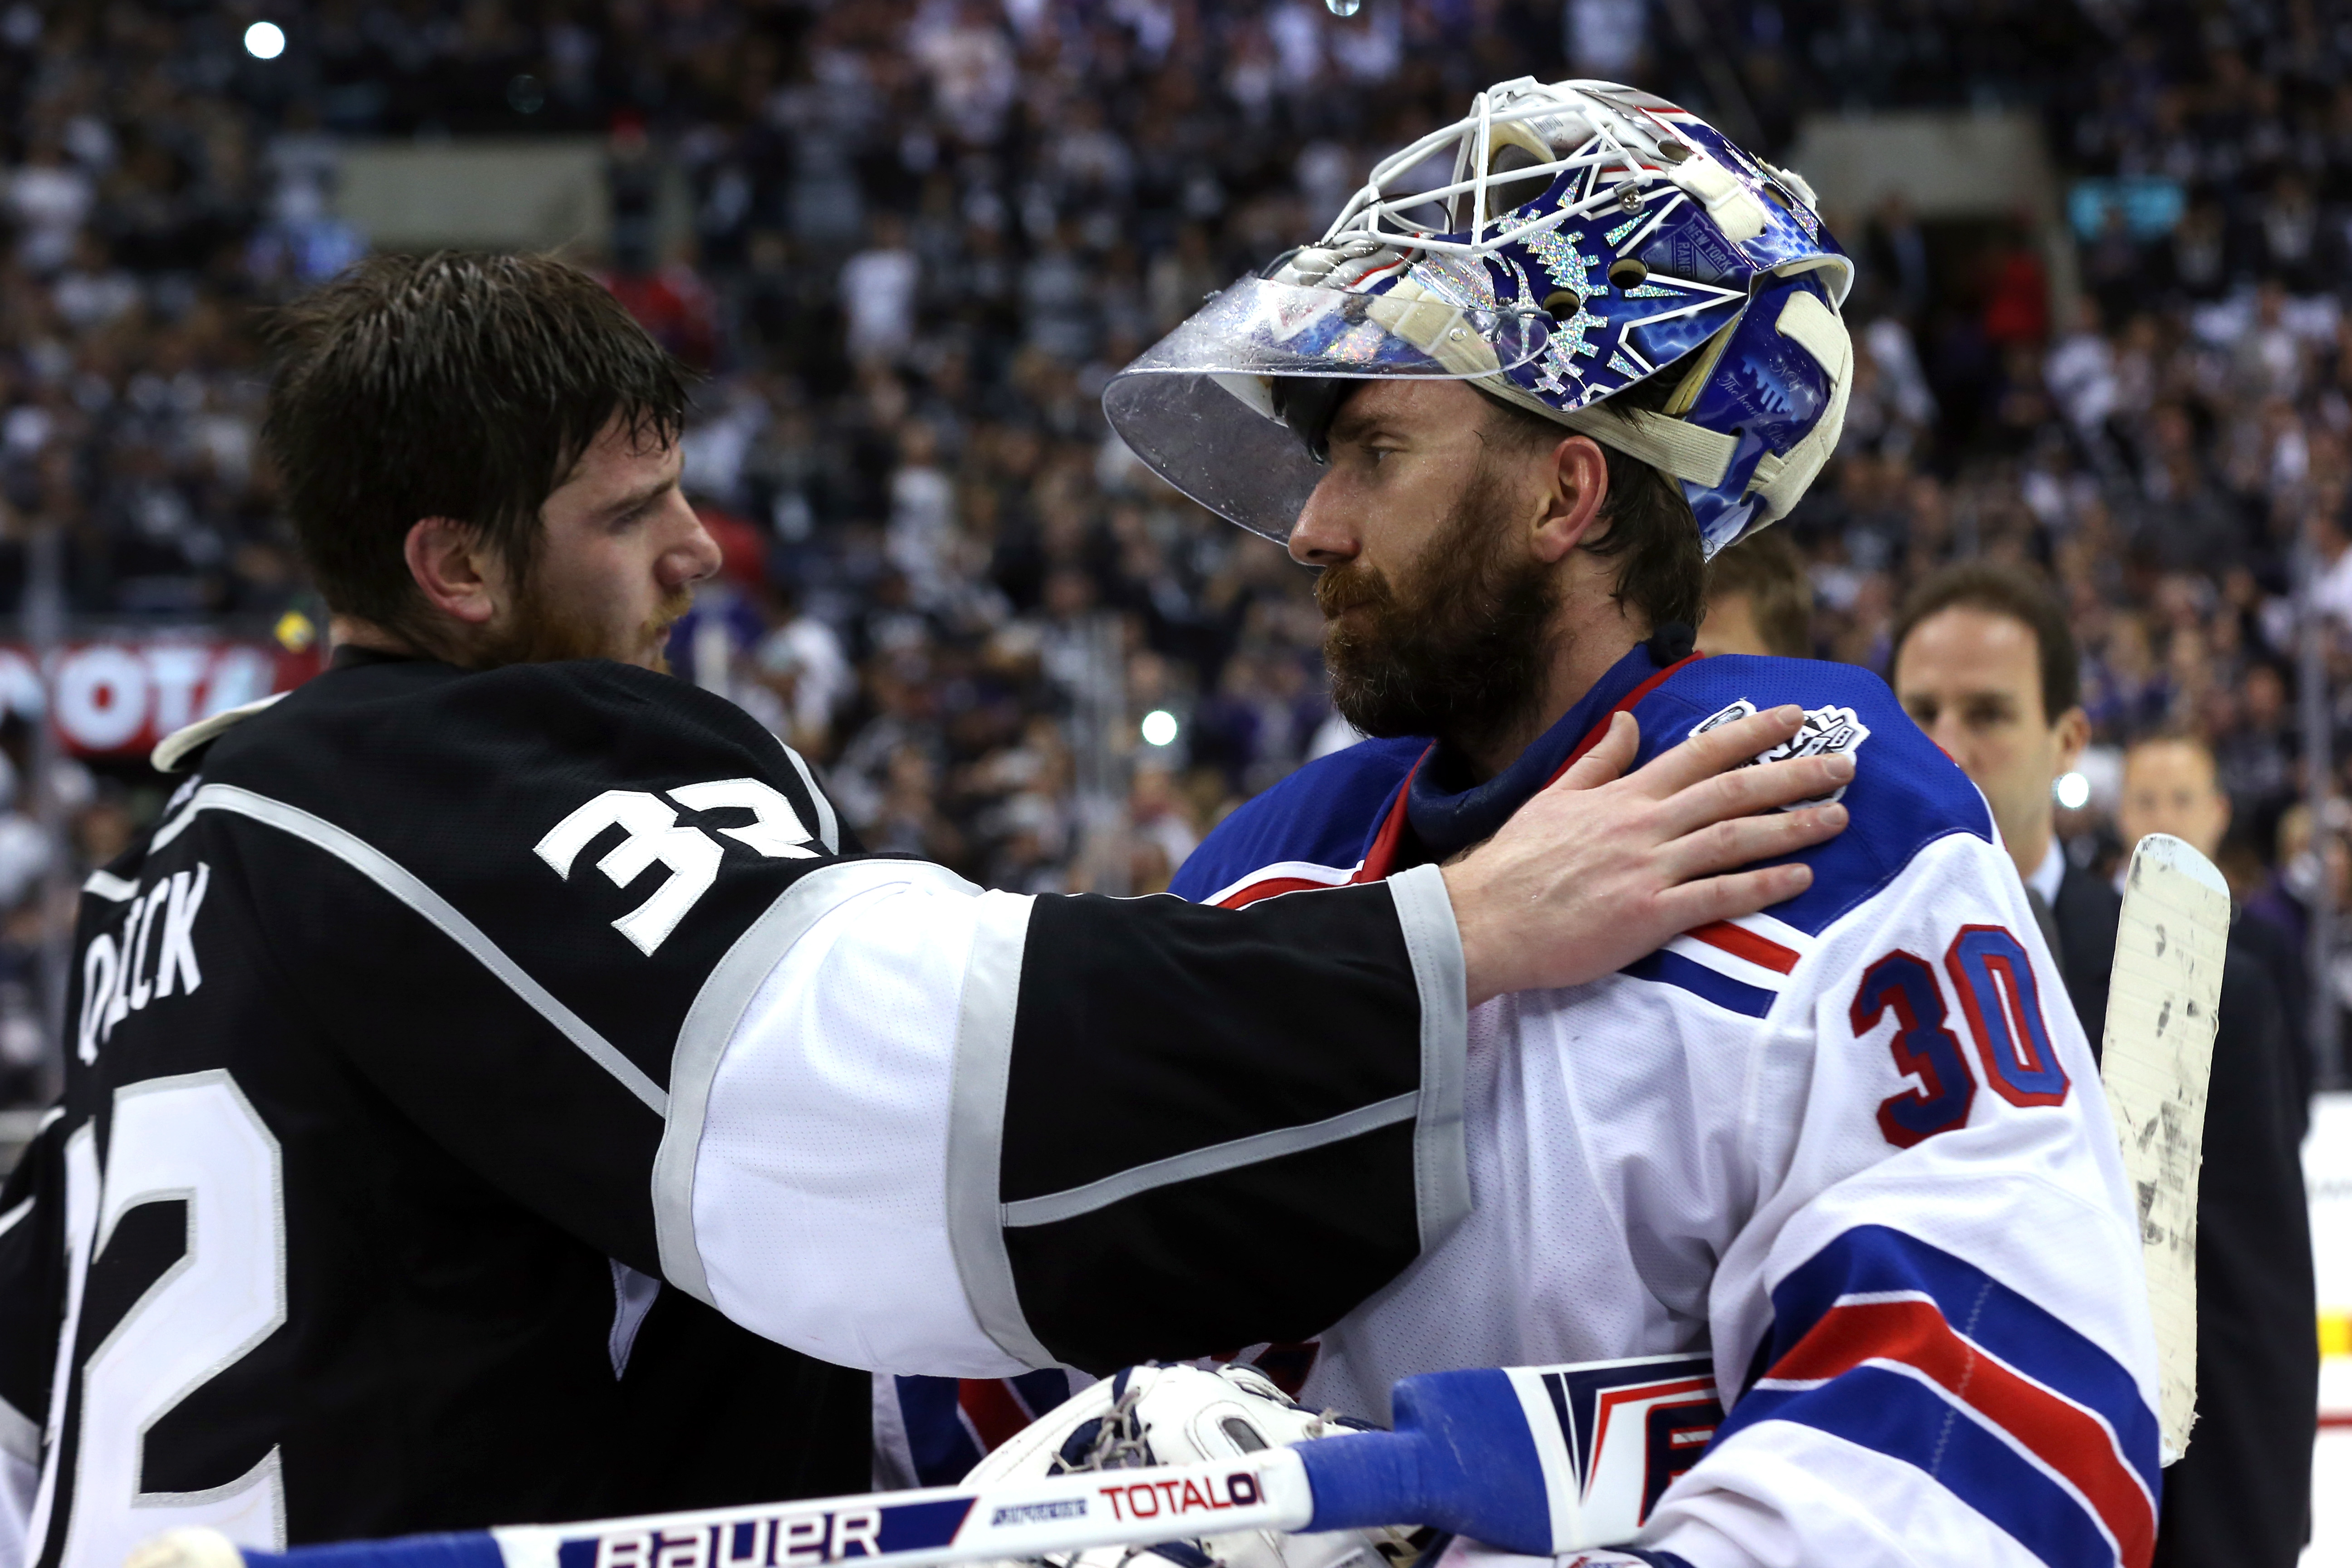 Jonathan Quick and Henrik Lundqvist shake hands after the Kings defeated the Rangers 3-2 in double overtime during Game 5 of the 2014 Stanley Cup Final at Staples Center on June 13, 2014 in Los Angeles, California.  (Photo by Bruce Bennett/Getty Images)